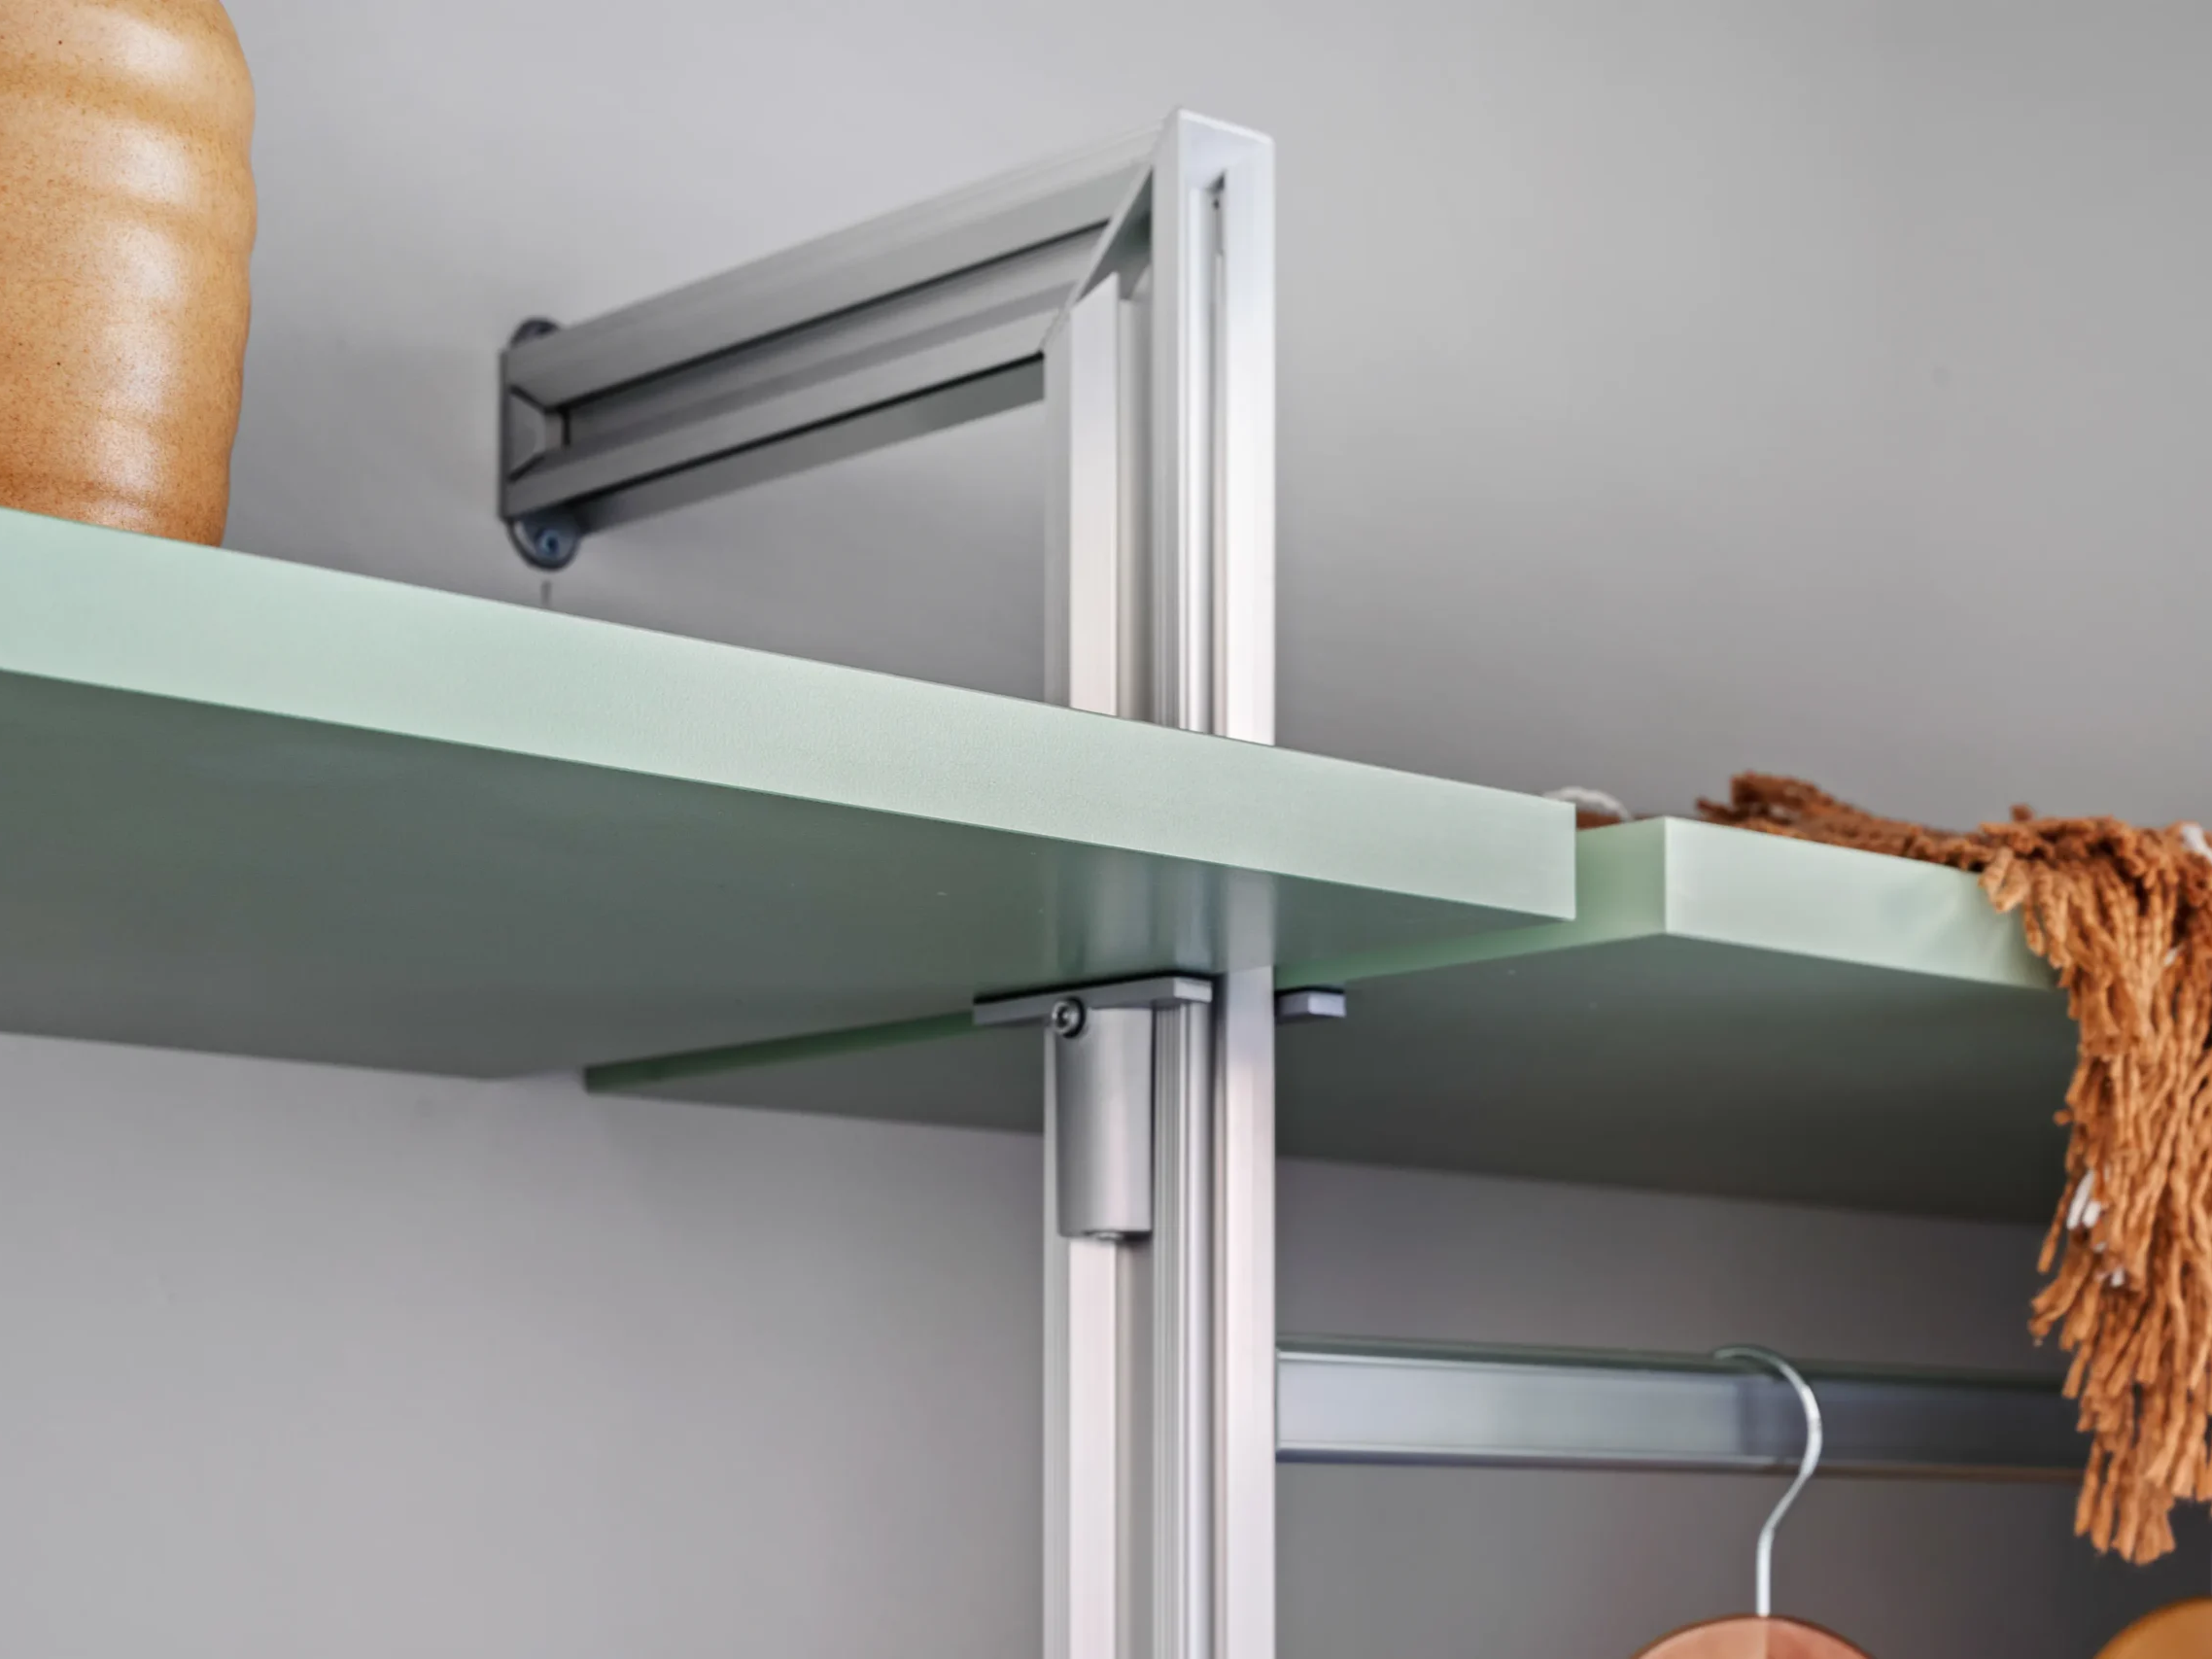 Innova reach-in Wardrobe in Melteca close up of stanchion